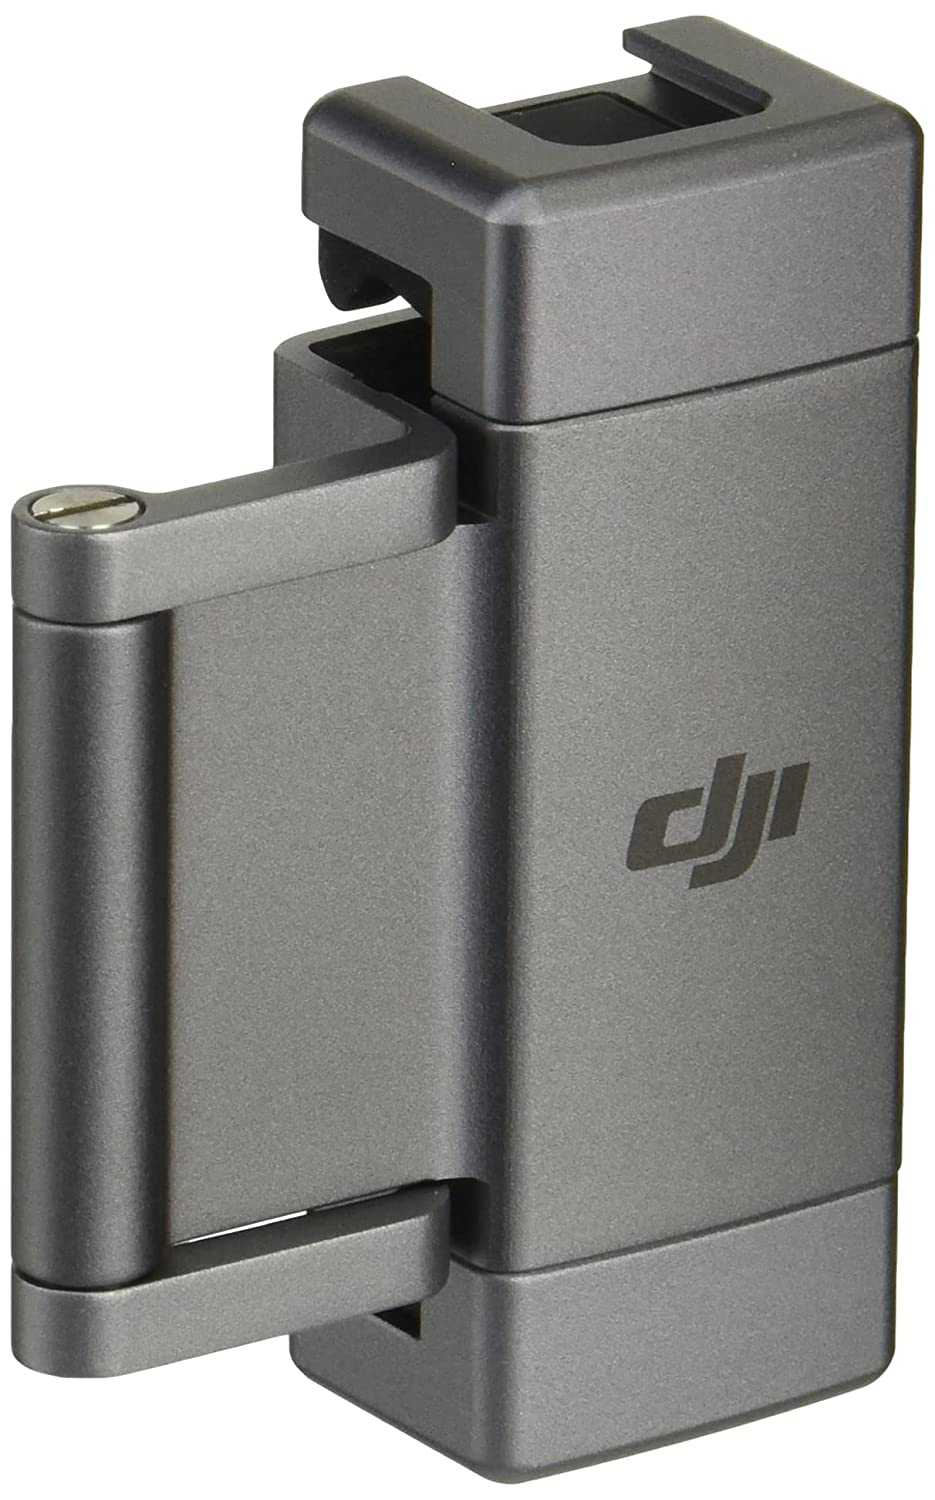 DJI Phone Clip for Pocket 2 and Osmo Pocket with 1/4-inch Bolt Mount and Cold Shoe Expansion Slot (Fits All Major Smartphone Brands)